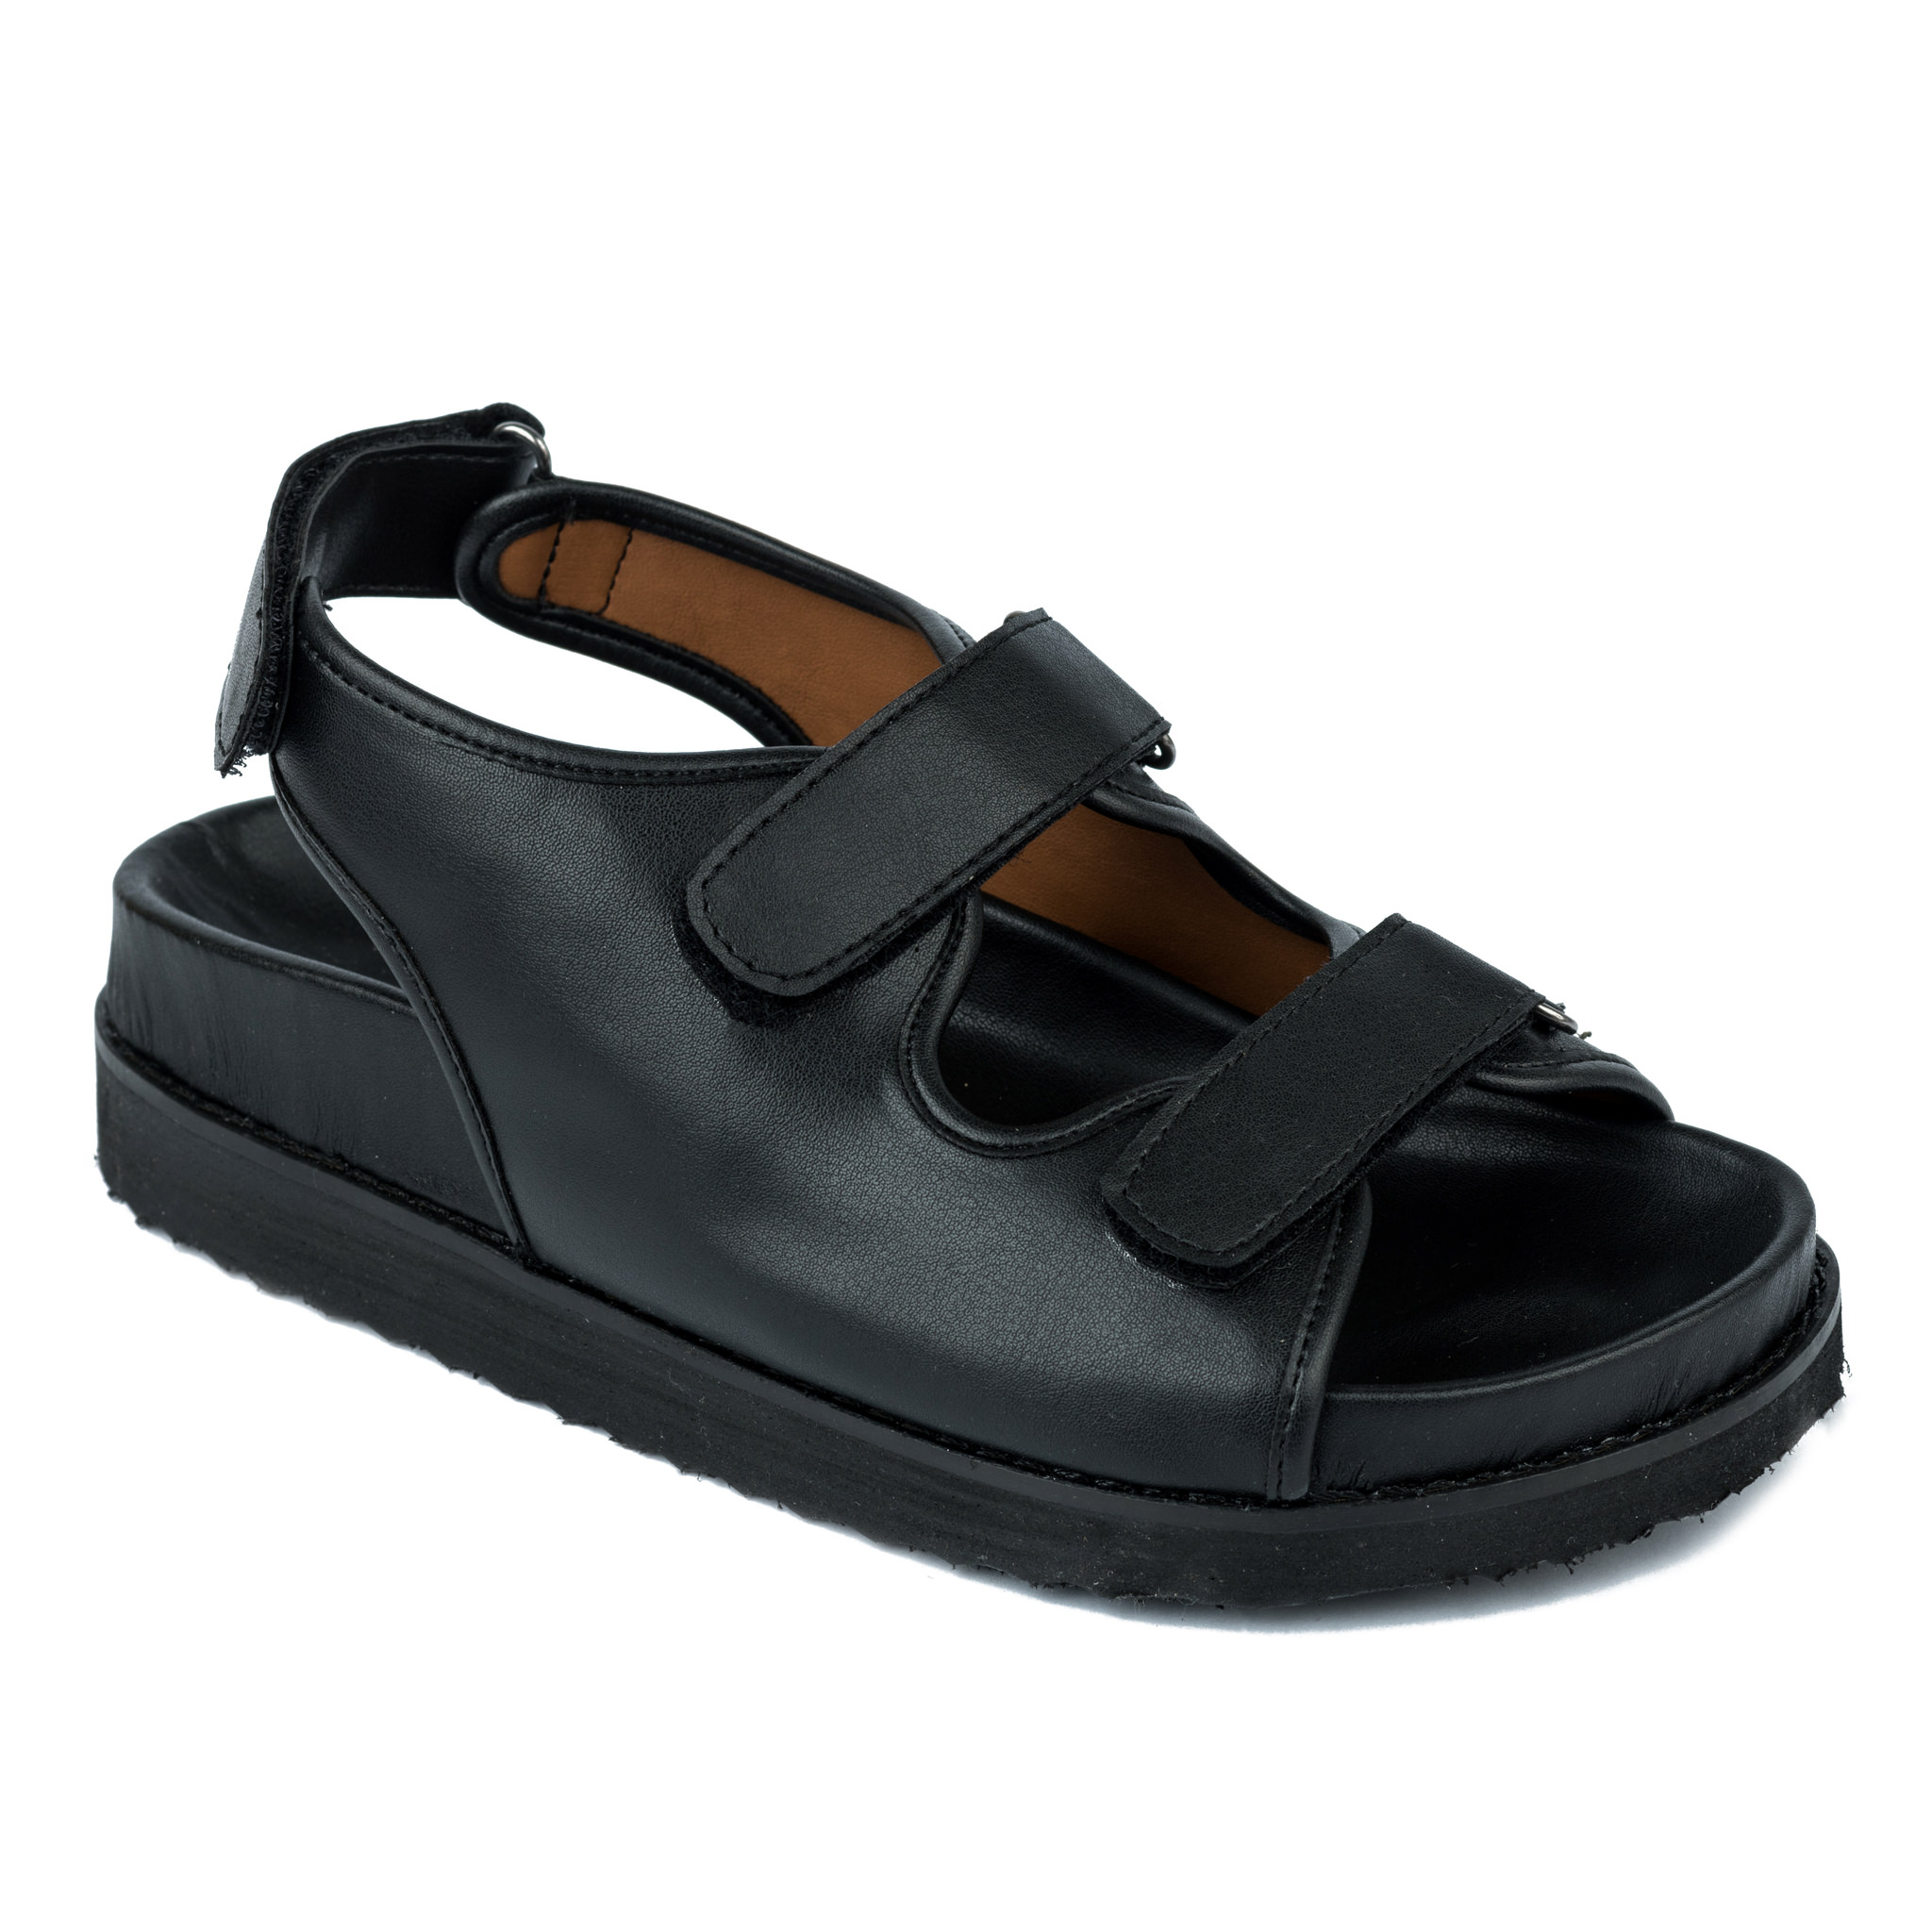 SPORT FLAT SANDALS WITH VELCRO BAND - BLACK